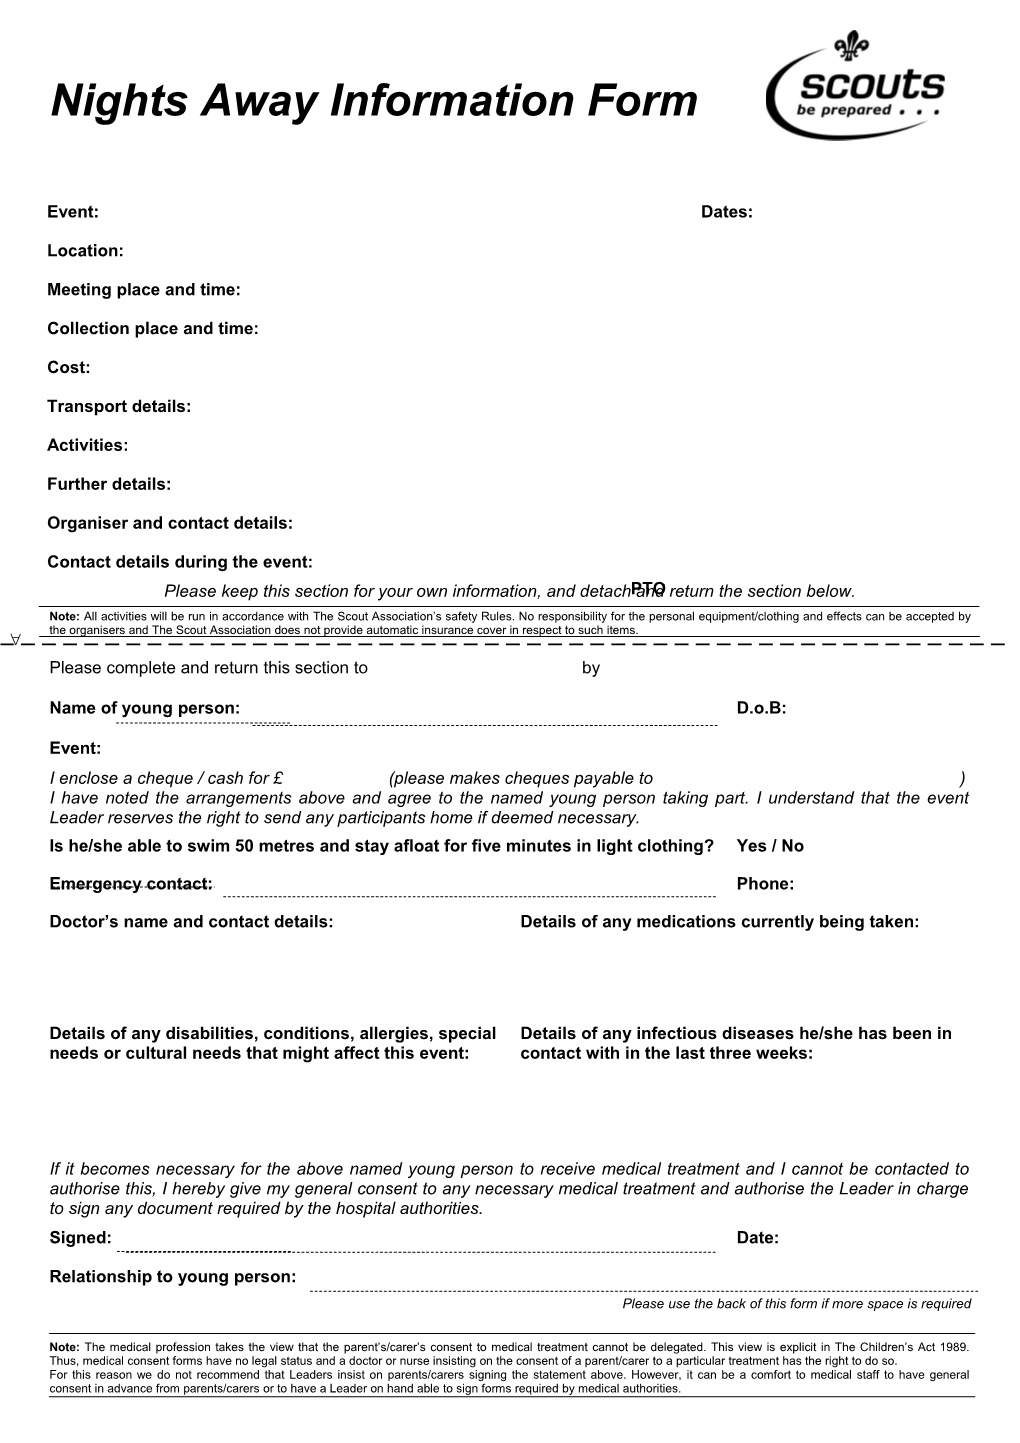 Activity Information Form s1